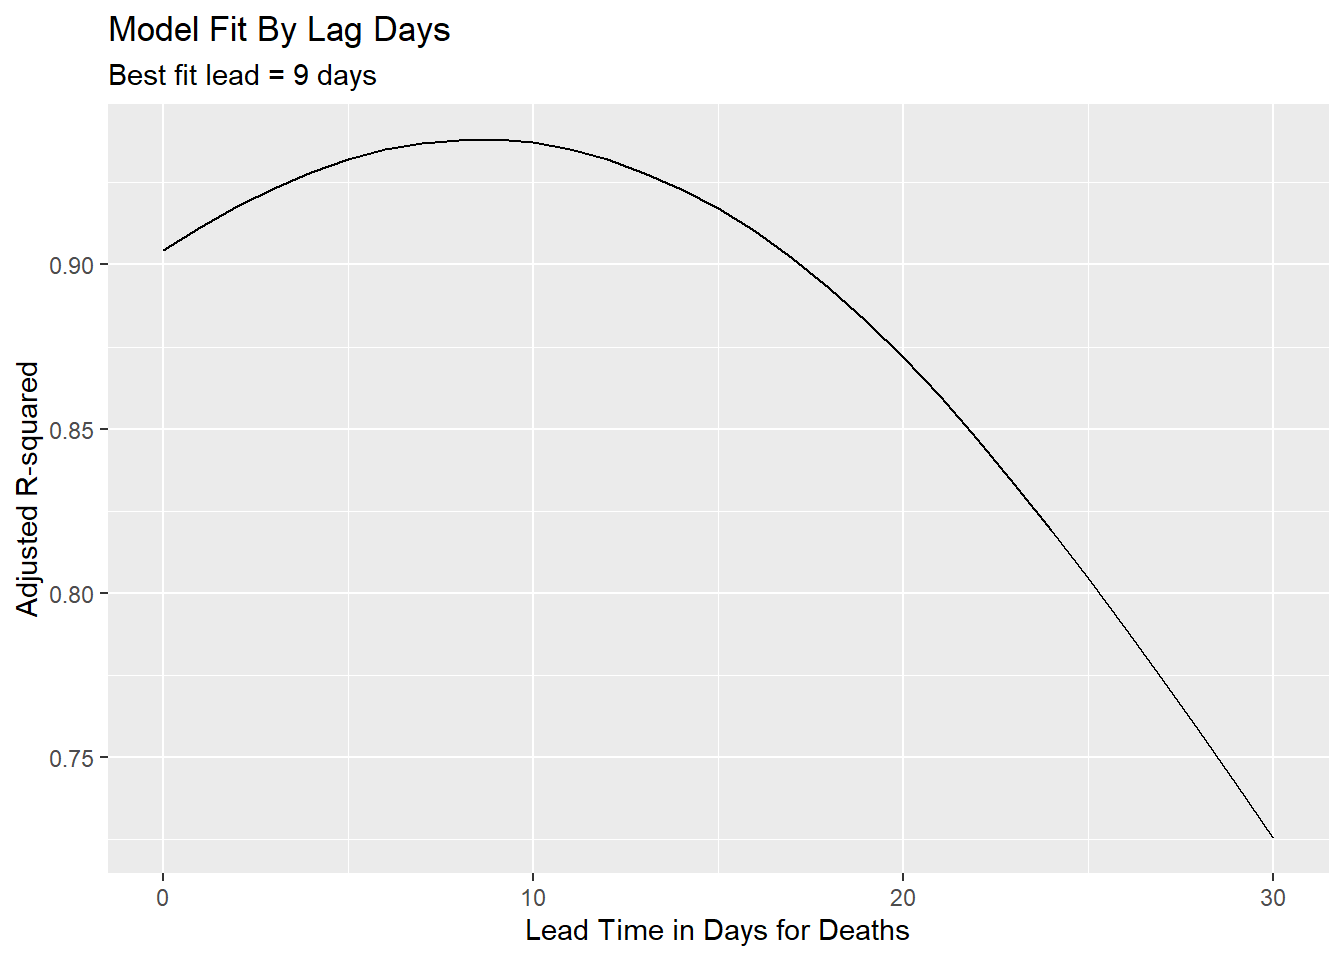 Using R-squared to decide best-fit lead time